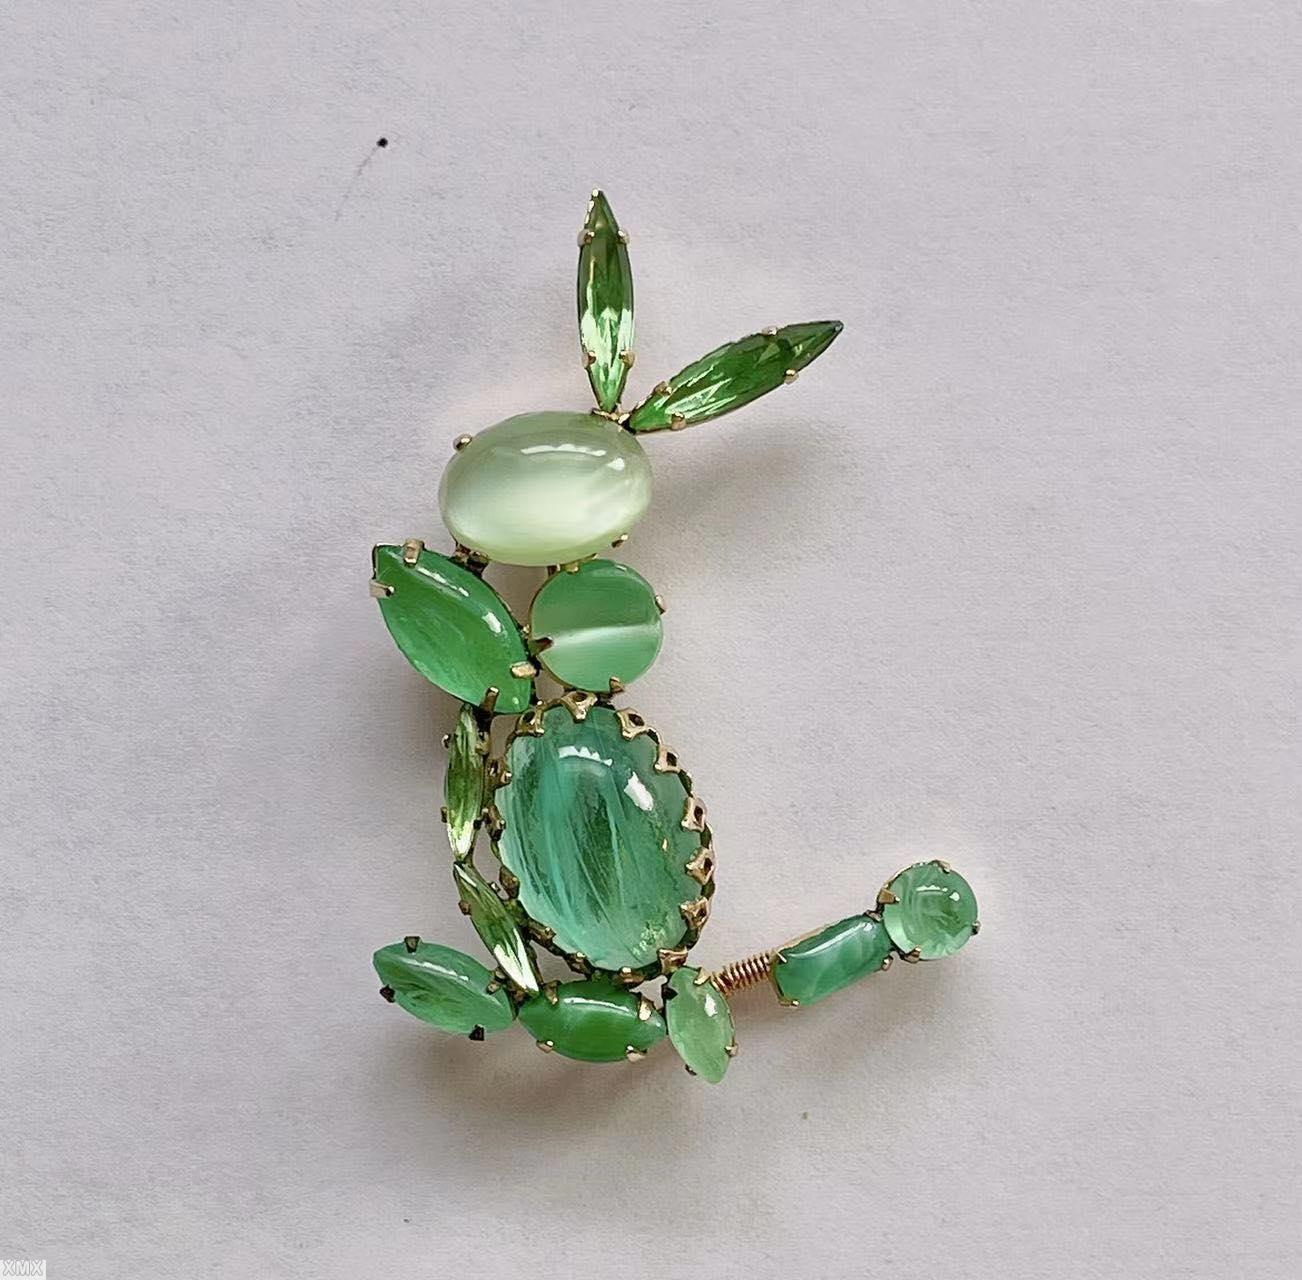 Schreiner bunny 1 large oval cab body 2 navette ear trembler tail apple green jelly bean marbled clear apple green large oval cab moonglow pale green oval cab goldtone jewelry